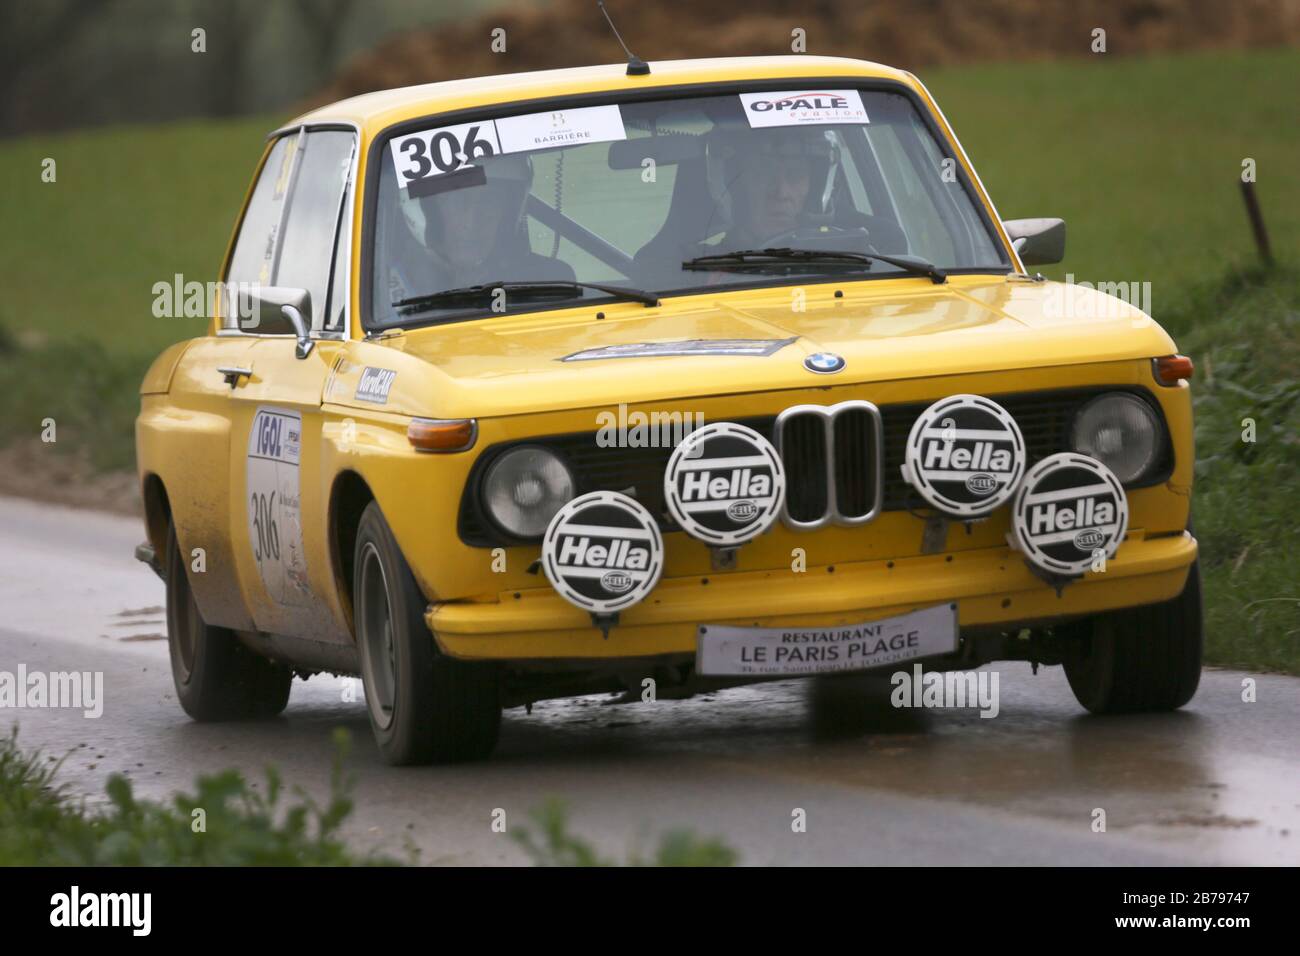 Rally Hella High Resolution Stock Photography and Images - Alamy